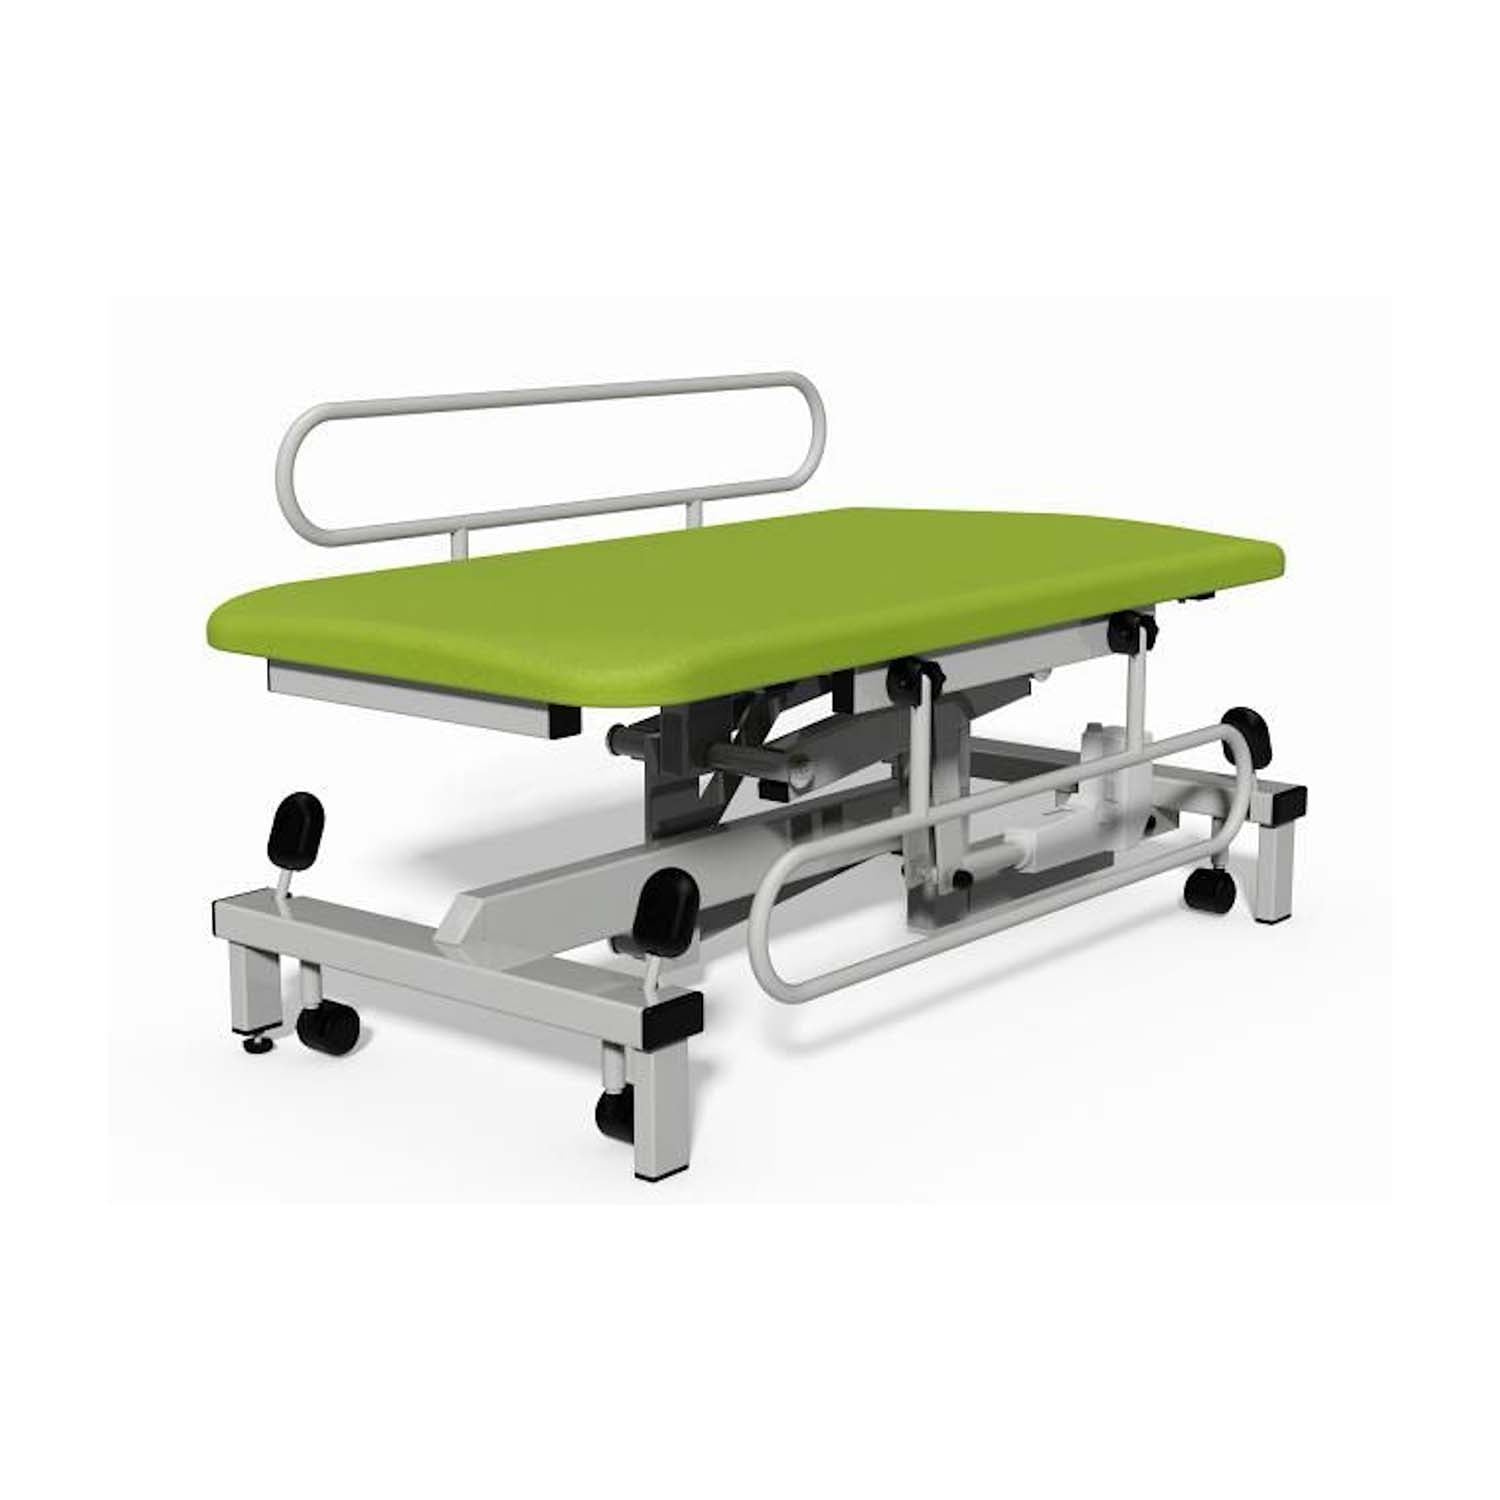 Plinth 2000 Model 502 Changing Table | Hydraulic | Citrus Green